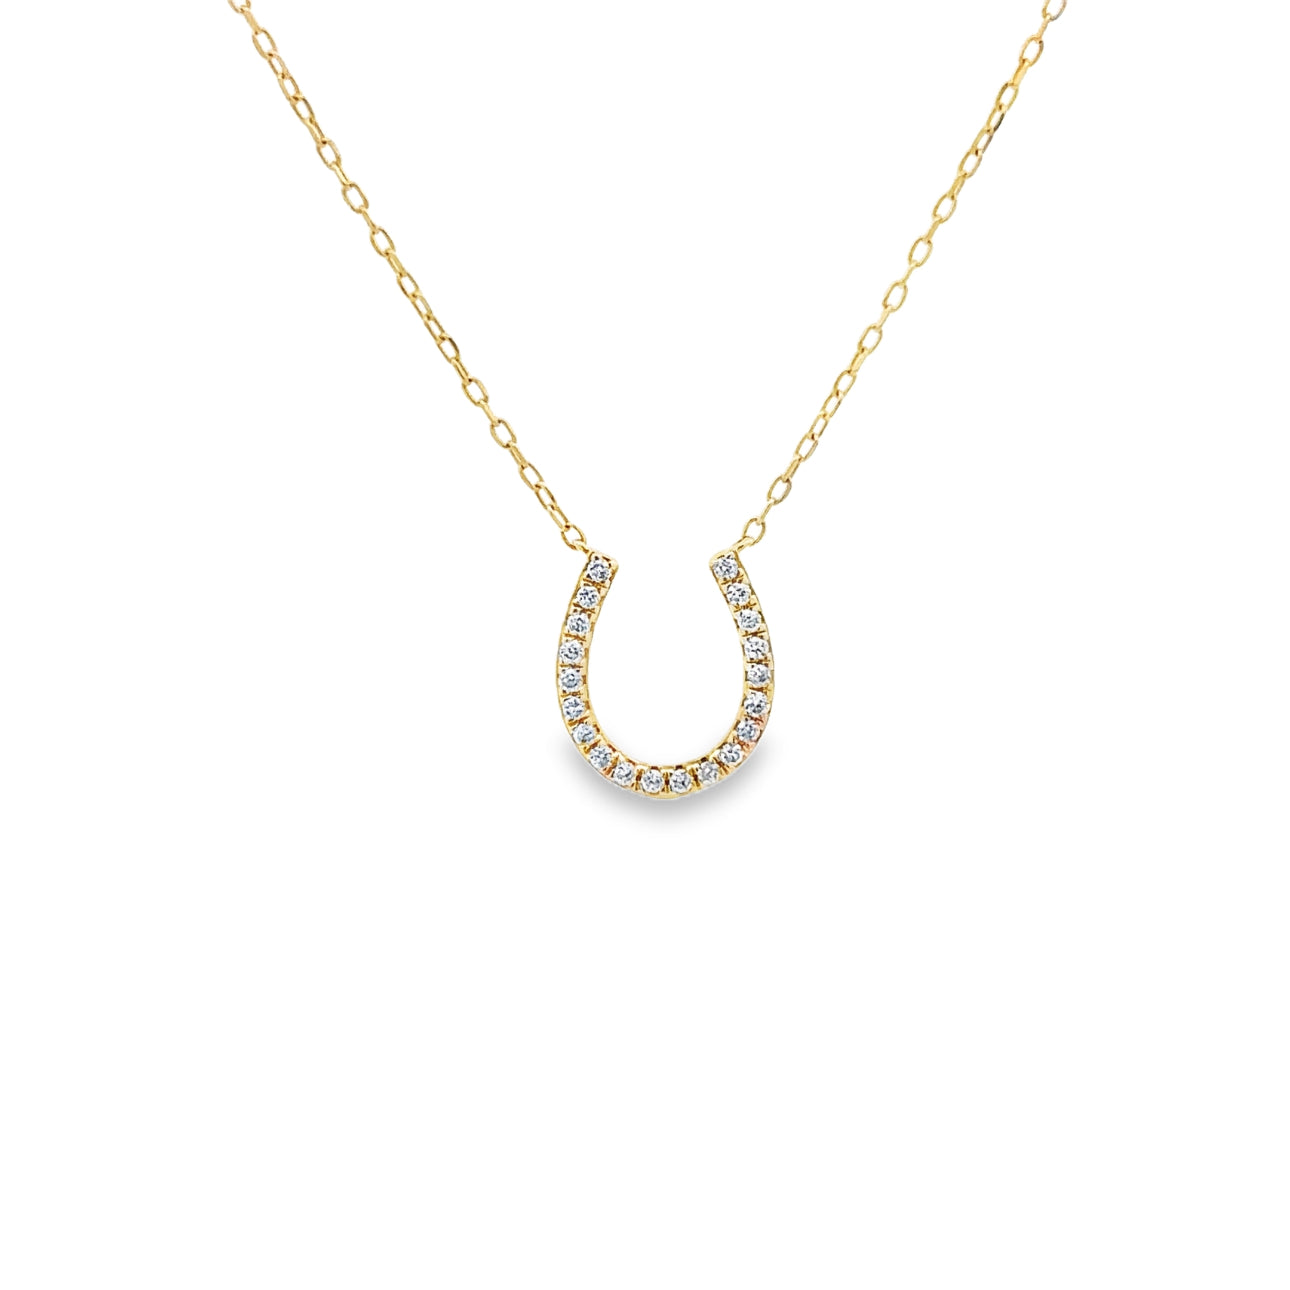 WD1637 14kt Gold Horseshoe Necklace with Pave Diamonds